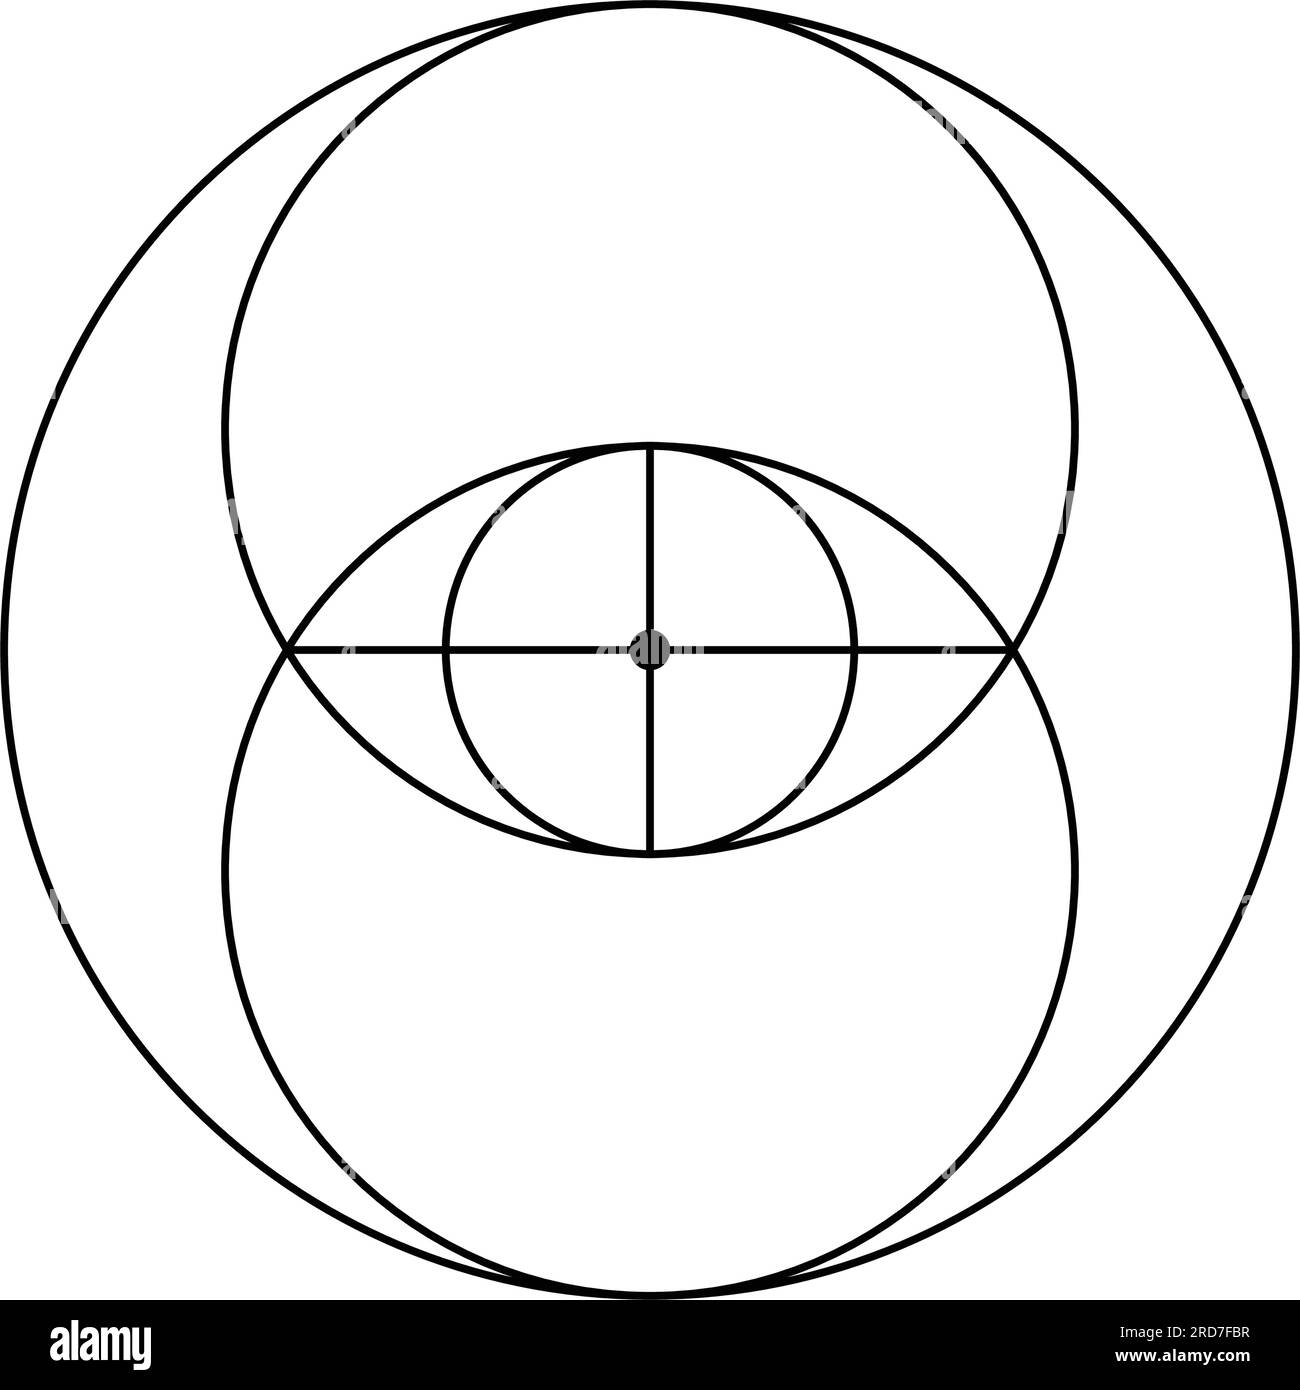 Vesica piscis. Scared Geometry Vector Design Elements. This is religion, philosophy, and spirituality symbols. the world of geometry. Stock Vector